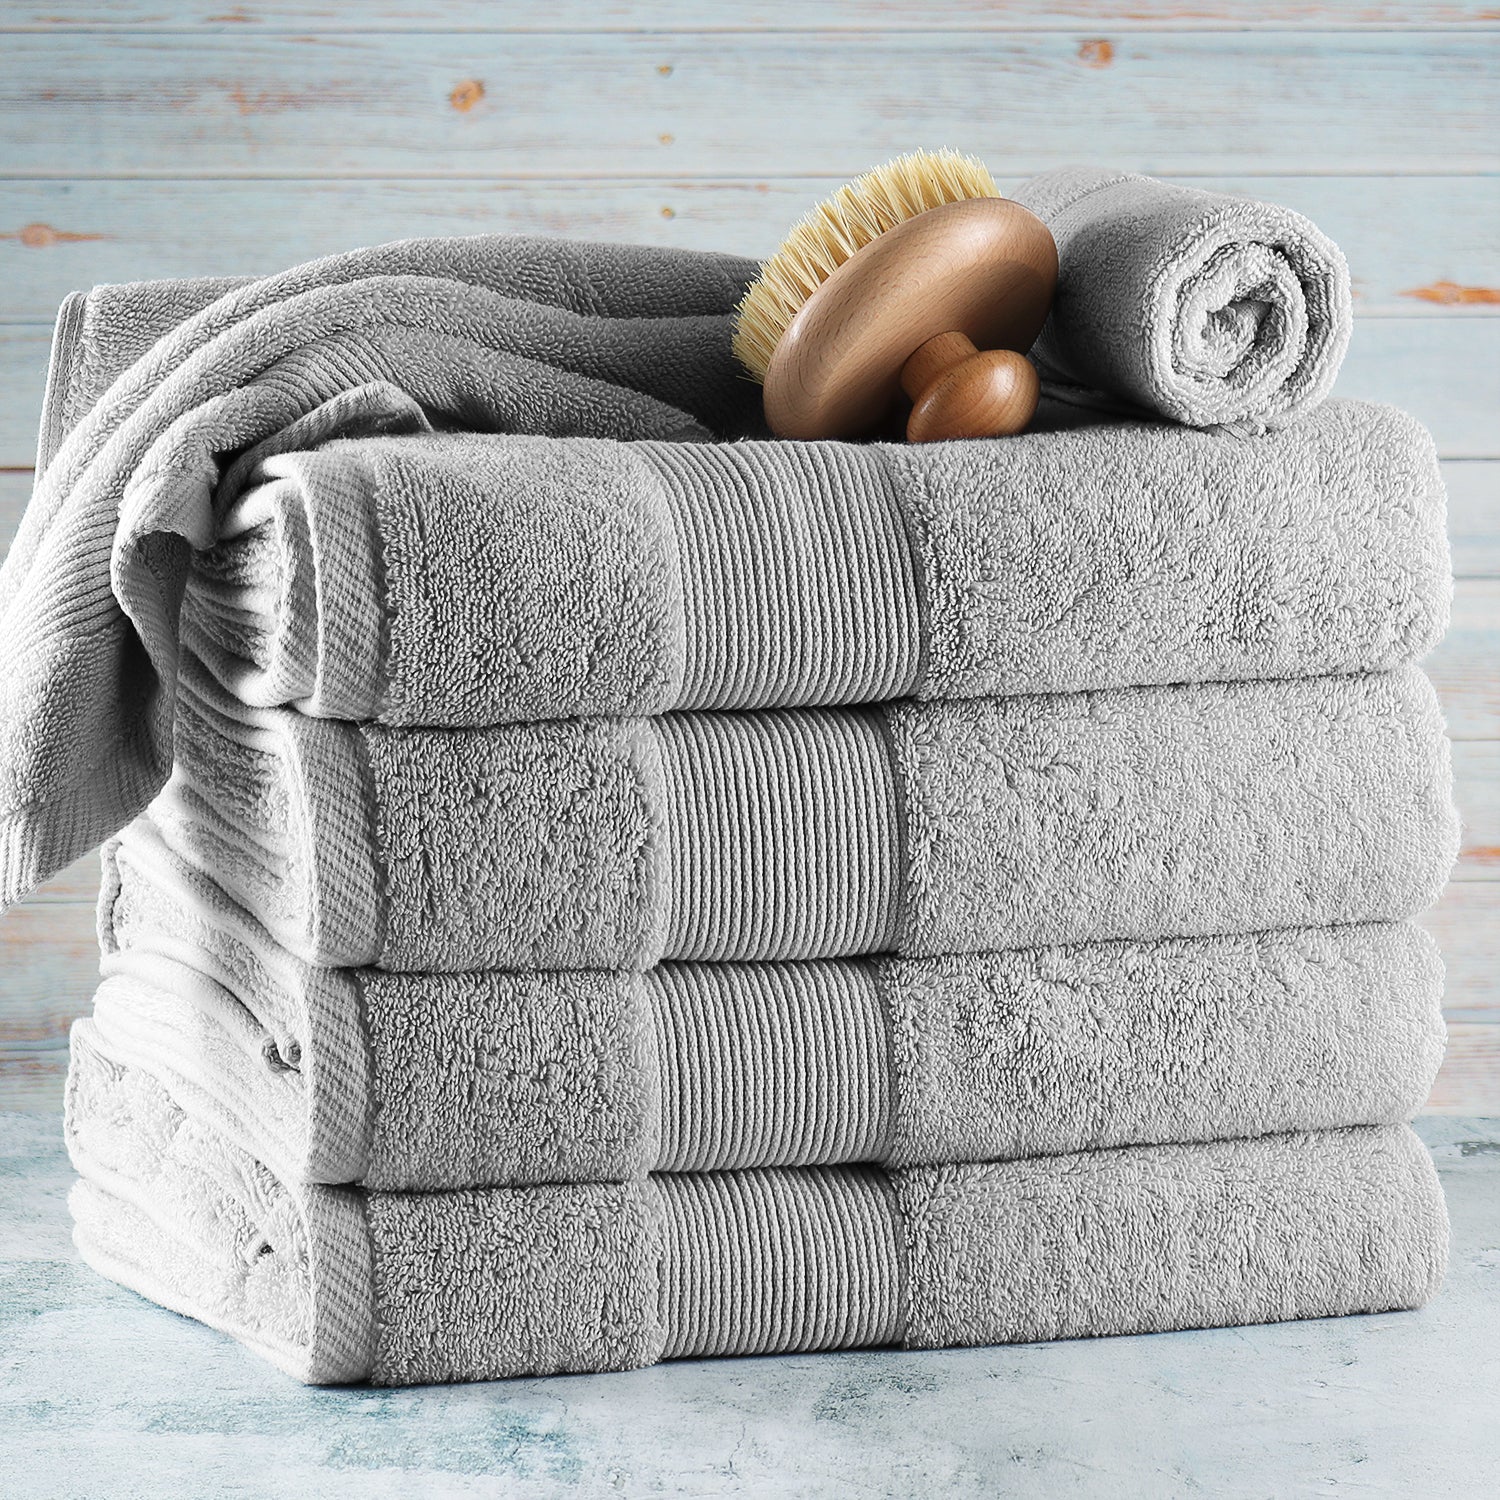 COTTON CRAFT Hotel Spa Luxury Bath Towel - 4 Pack - Oversized Extra Large  30 x 58 - Heavyweight 700 GSM 2 Ply Ringspun Cotton - Soft Absorbent